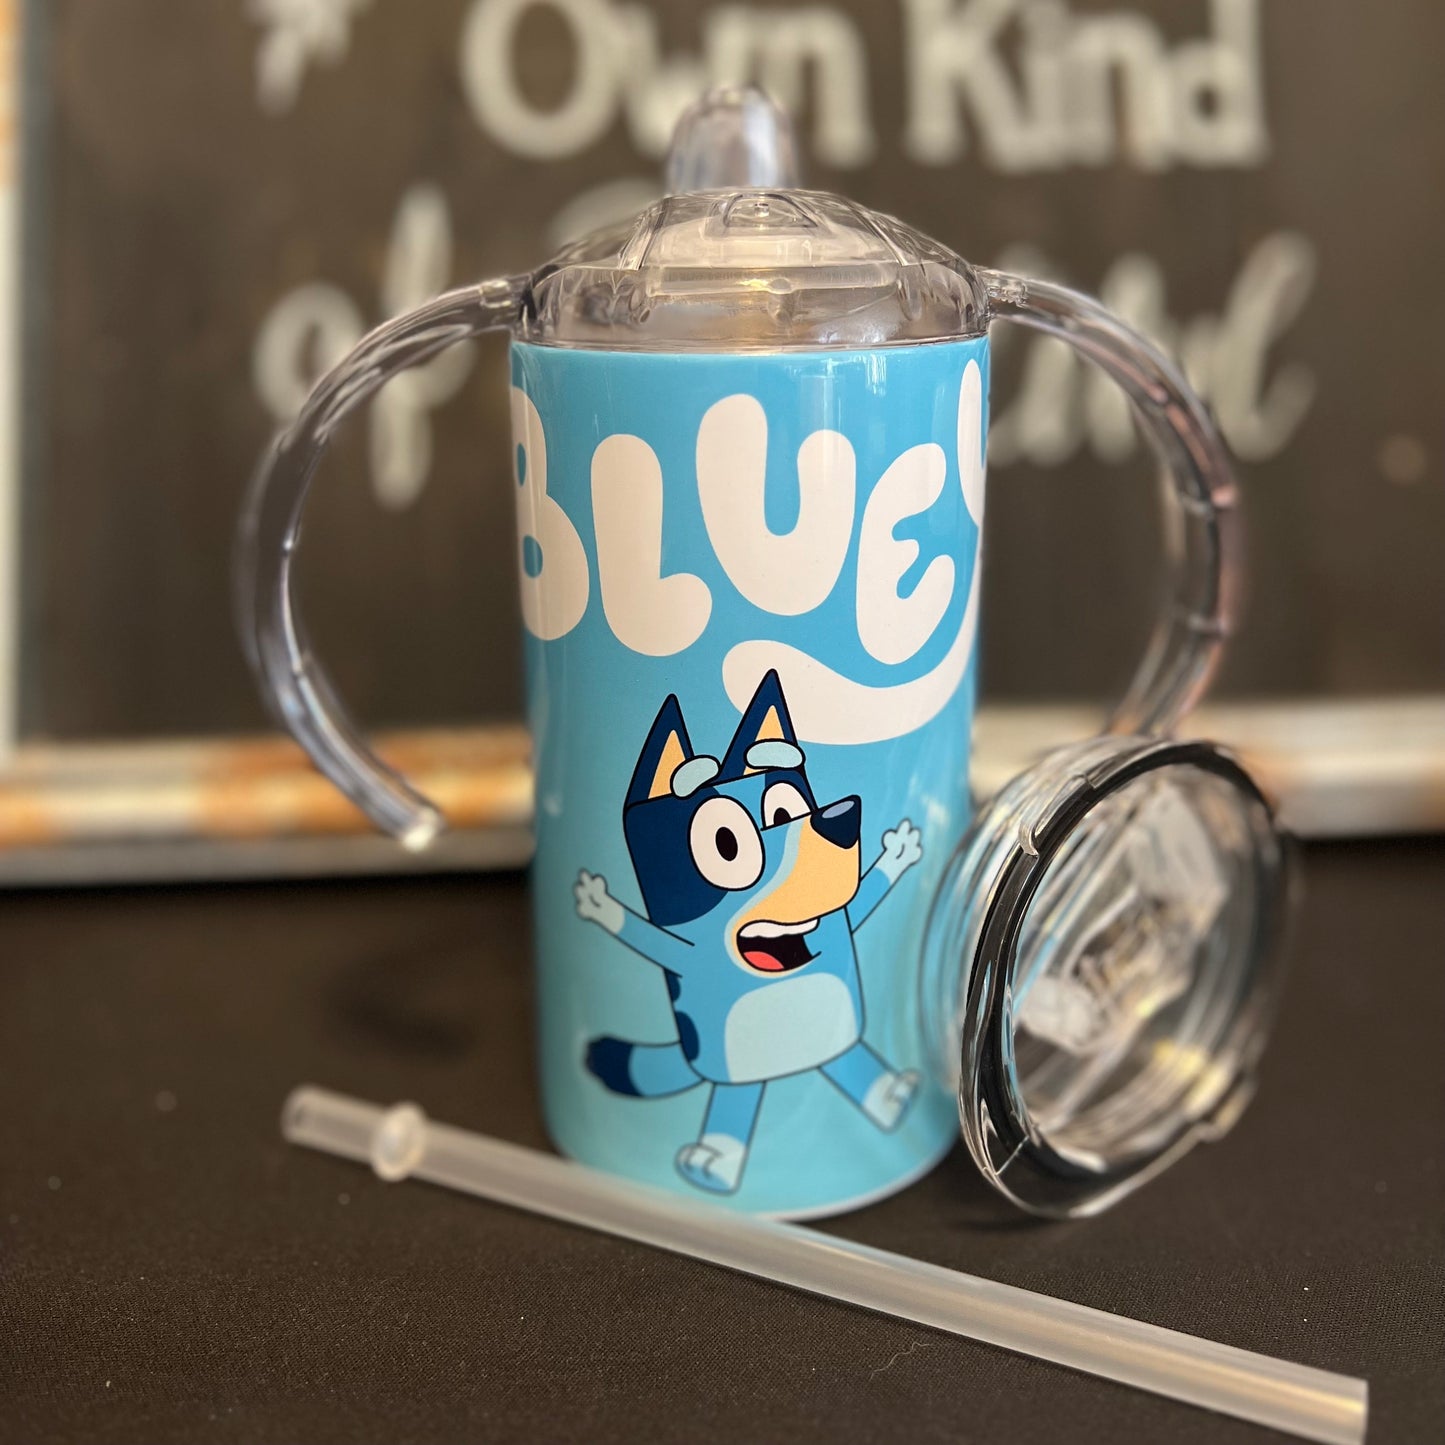 Bluey Sippy Cup Bluey Tumbler Cup Bluey Cup Bluey Tumbler Bluey Stainless  Steel Tumbler Bluey Disney Channel 